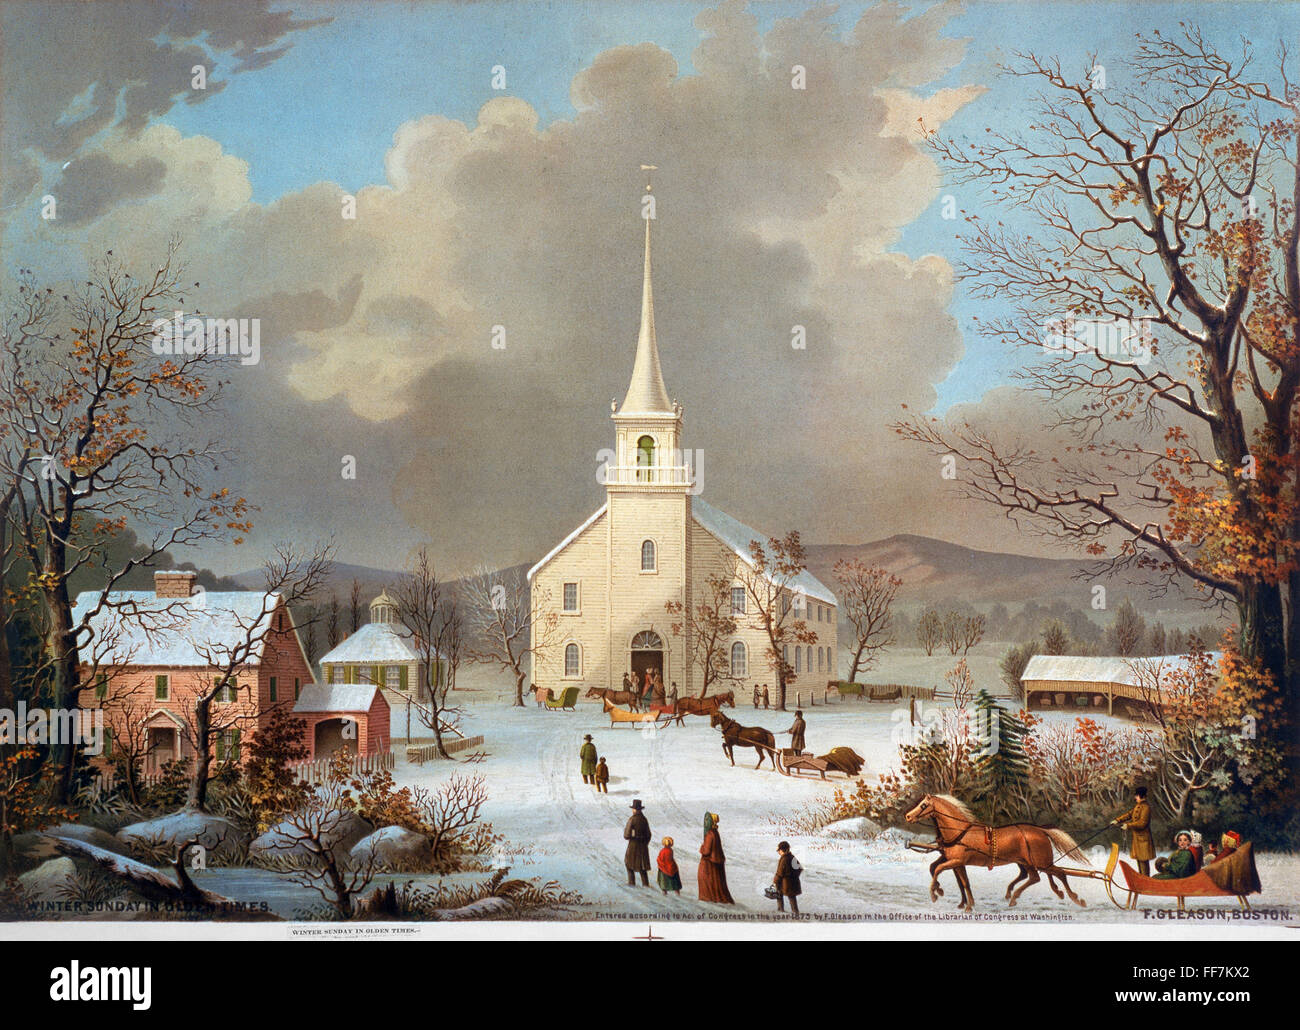 WINTER SCENE, c1875. /n'Winter Sunday in Olden Times.' American lithograph, c1875. Stock Photo